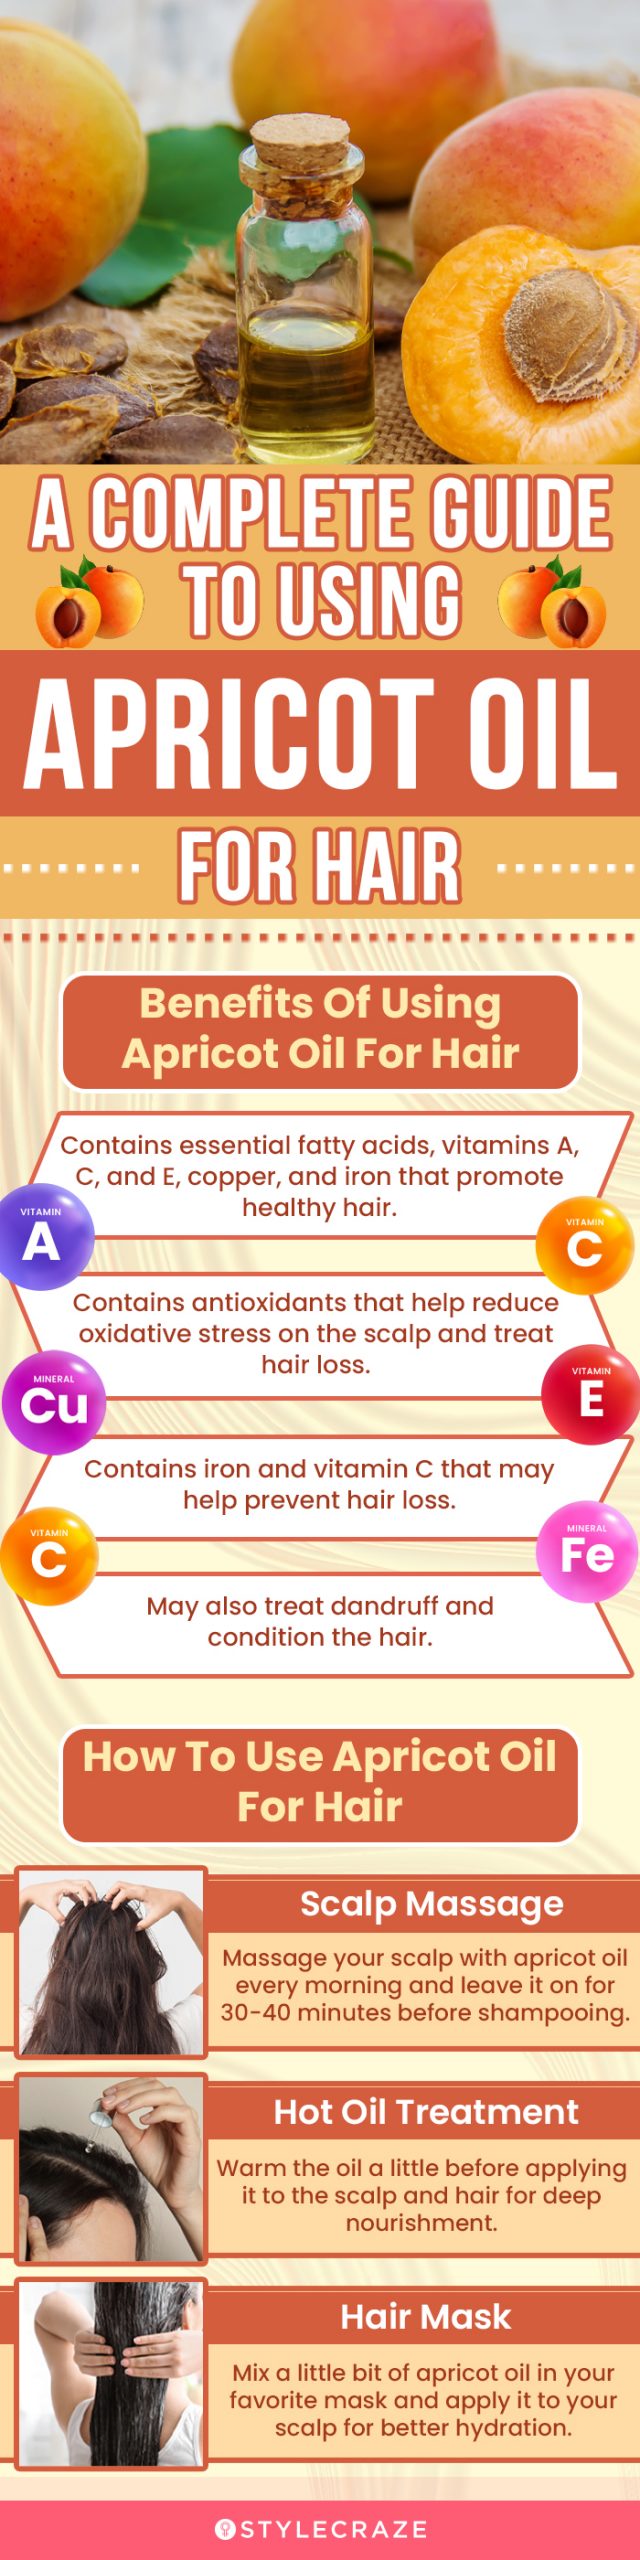 a complete guide to using apricot oil for hair (infographic)